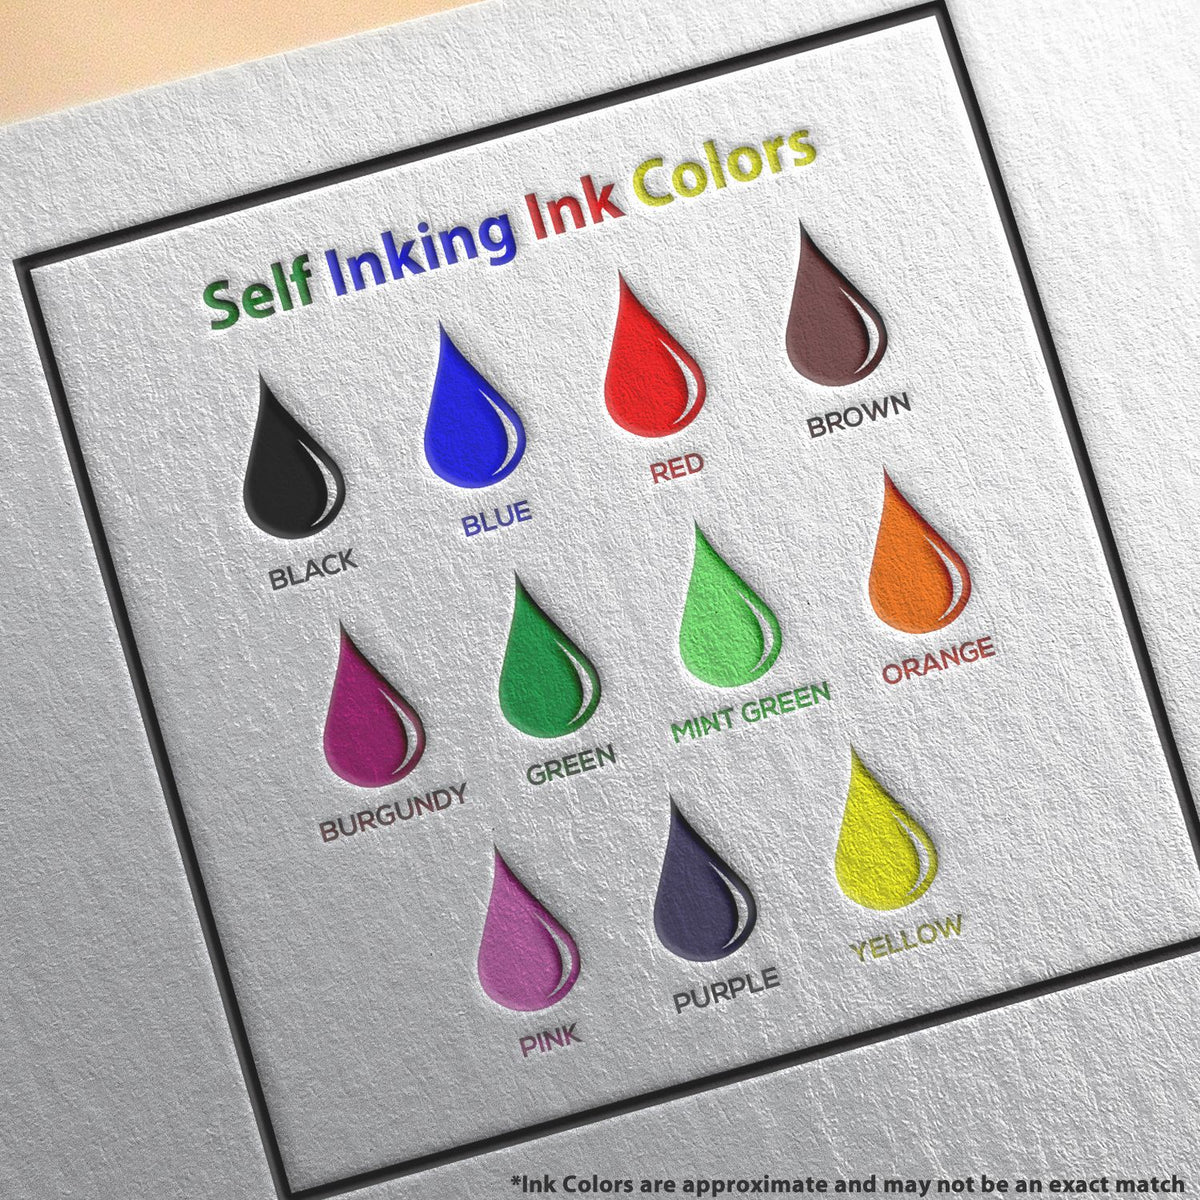 A picture showing the different ink colors or hues available for the Self-Inking Maine Landscape Architect Stamp product.